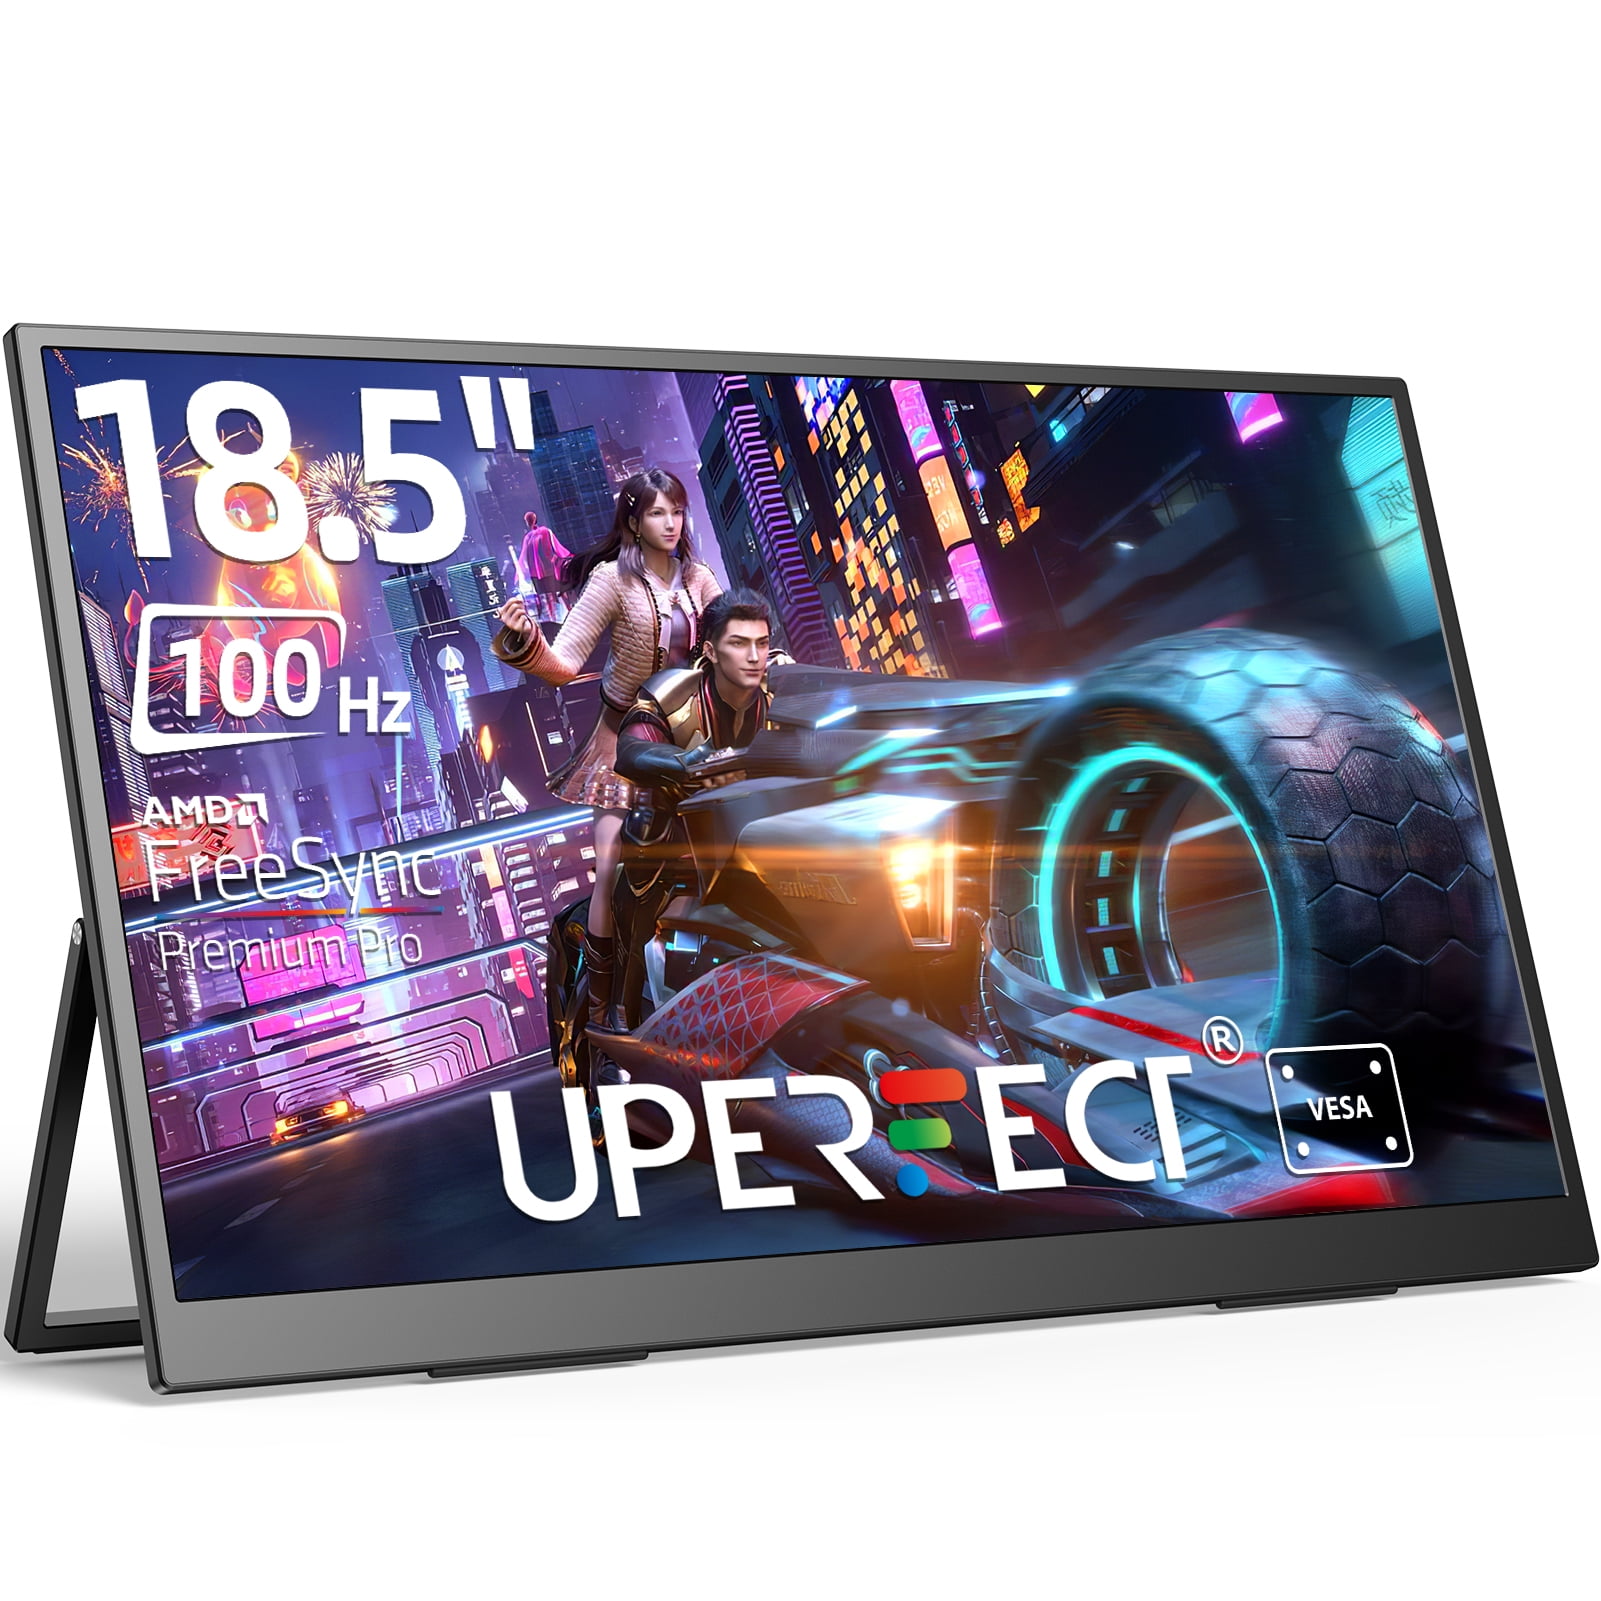 UPERFECT 18 UMax - Portable monitor 18.5 FHD 1080P 120HZ Gaming Monitor W/  Adjustable Stand USB-C HDMI External Monitor 